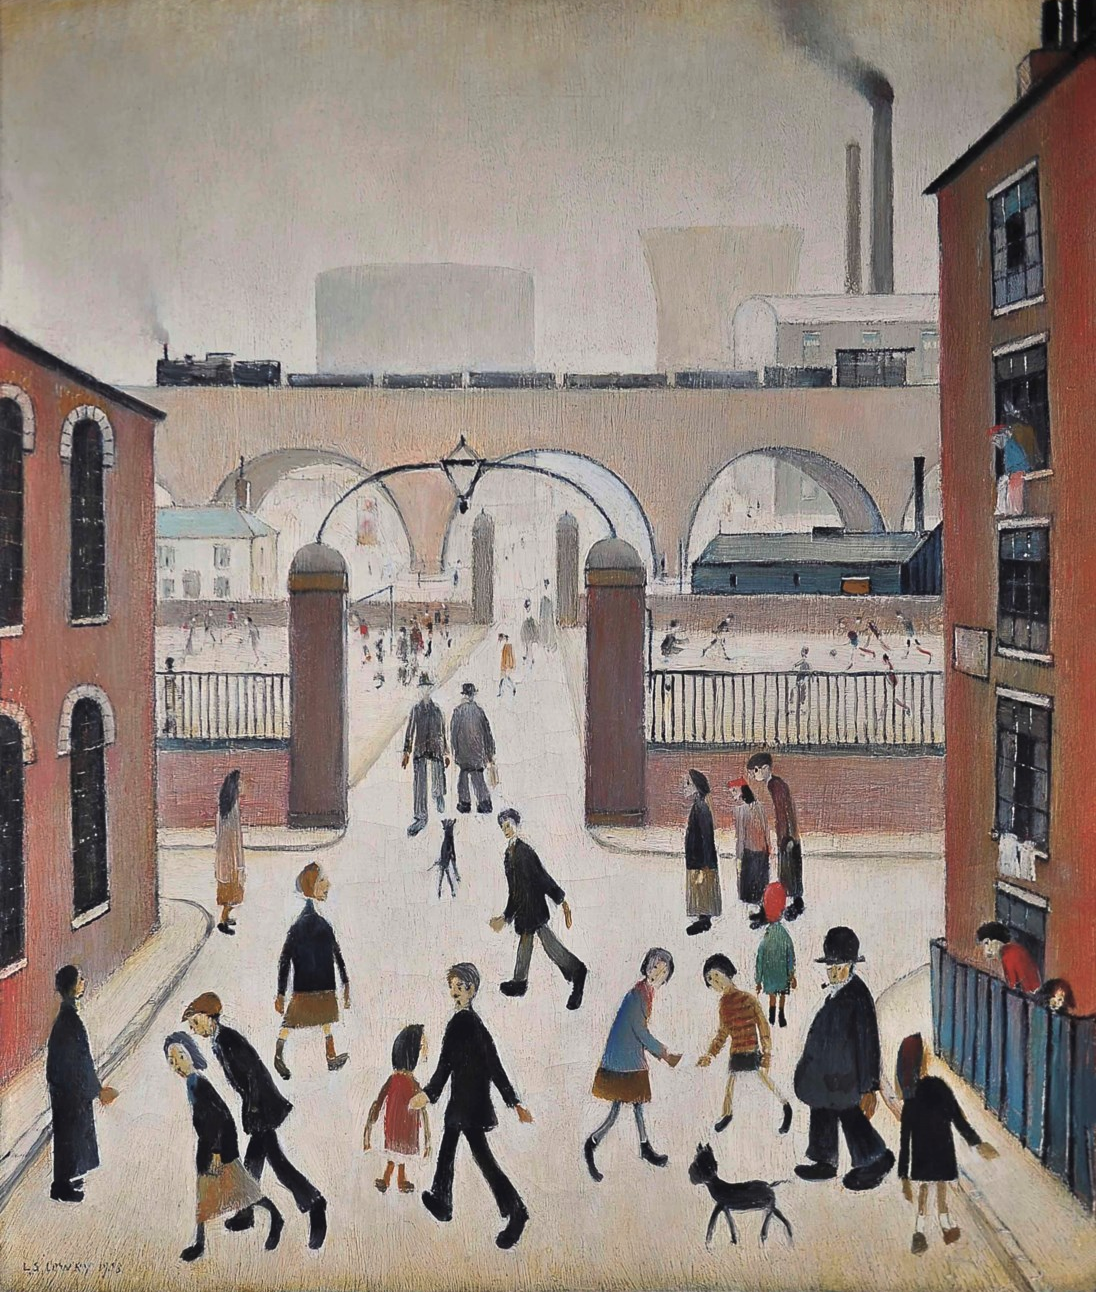 Industrial Landscape (1958) by Laurence Stephen Lowry (1887 - 1976), English artist.